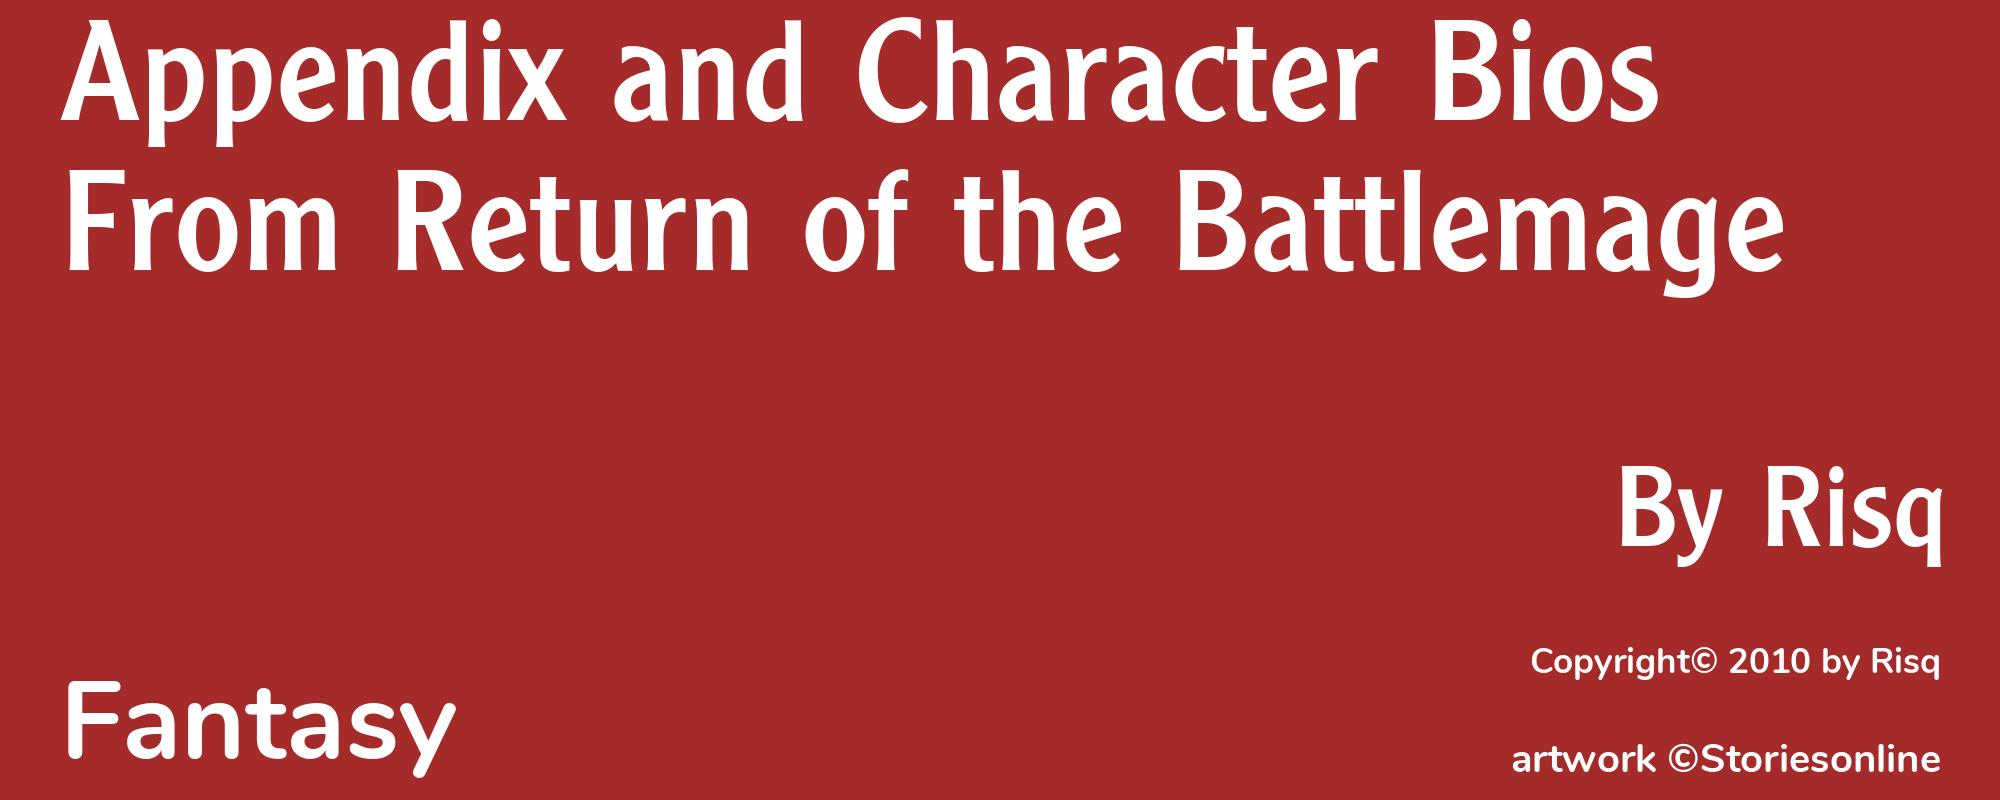 Appendix and Character Bios From Return of the Battlemage - Cover